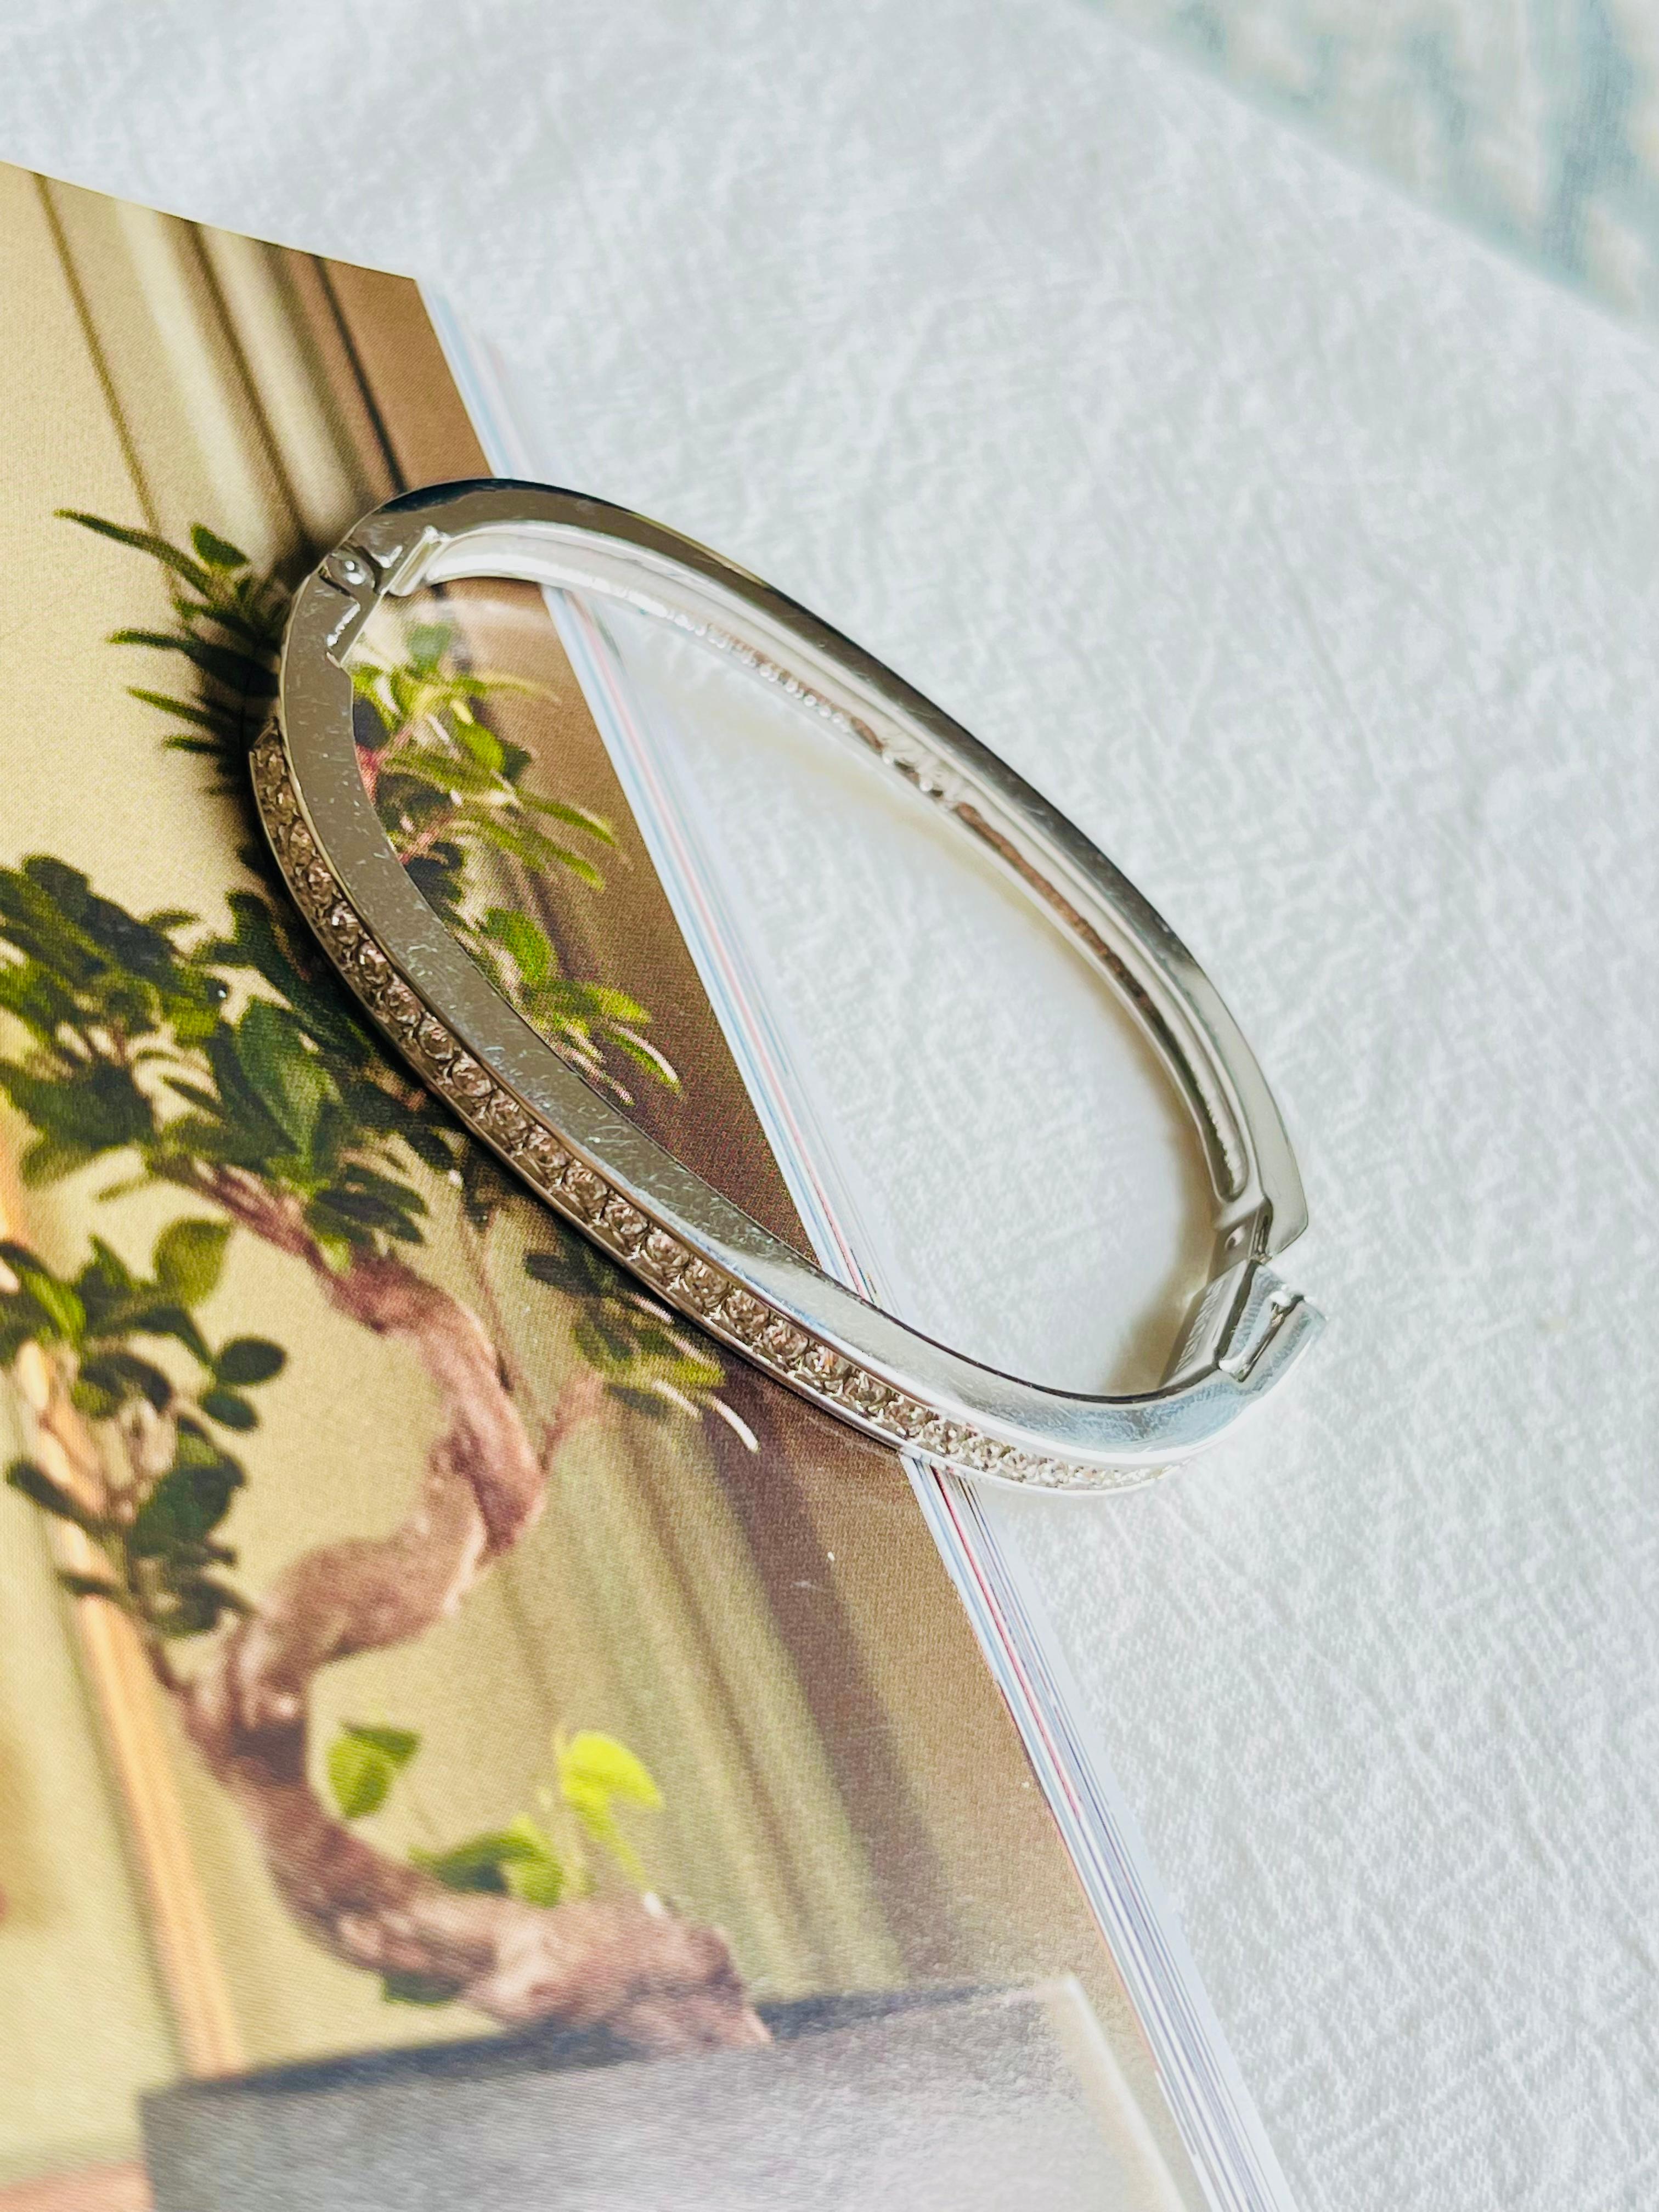 Very good condition. With light surface wear. 100% genuine.

This attractive and stylish bangle by Swarovski is an essential addition to any jewellery collection. It is beautifully embellished with a line of clear crystal pavé that adds brilliant